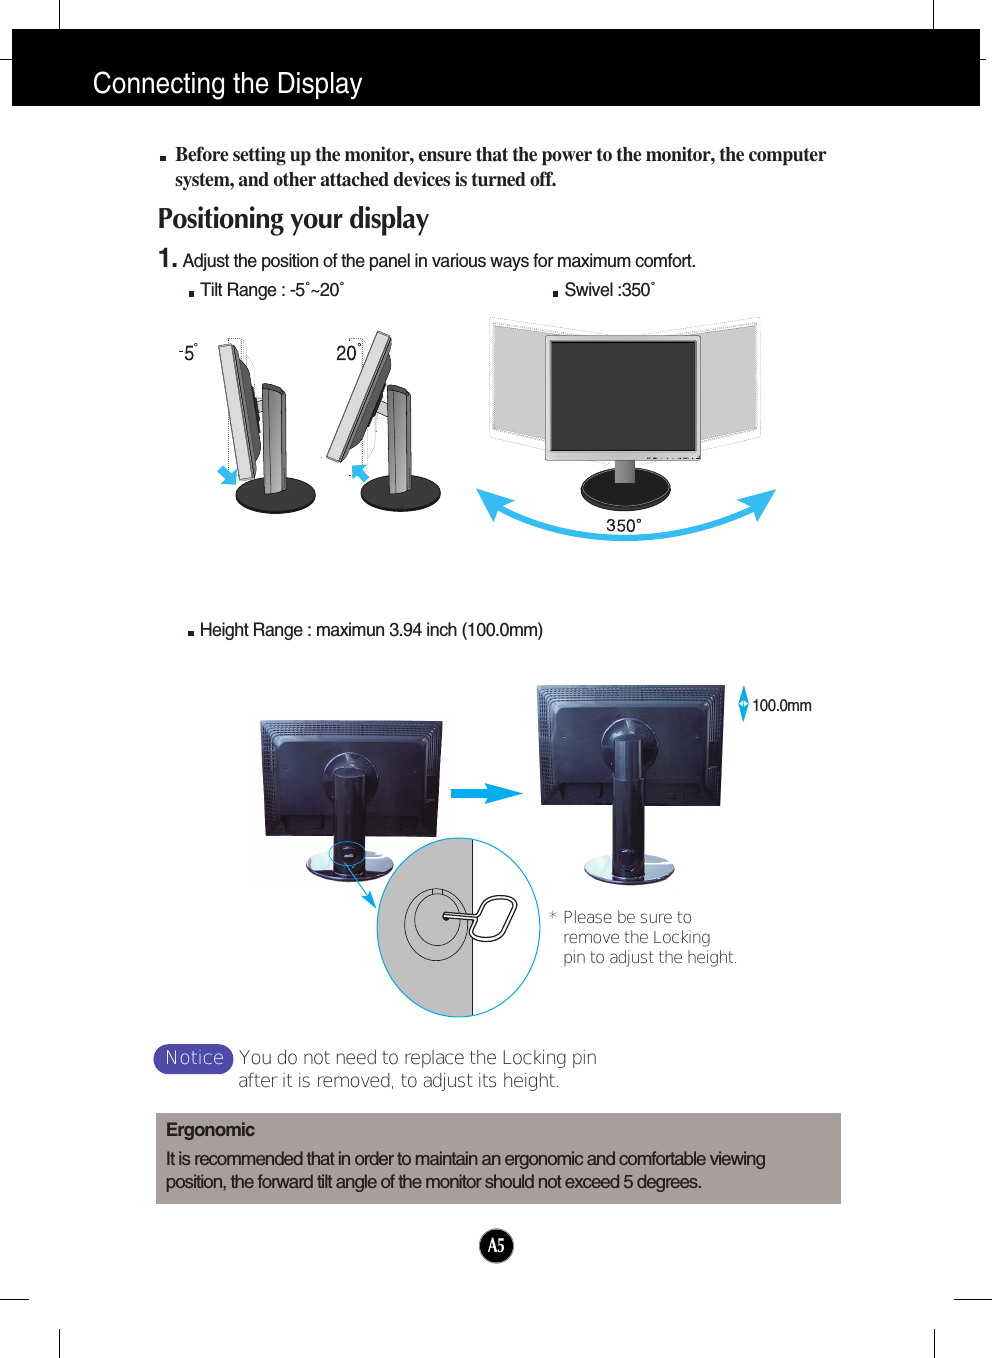 A5Connecting the DisplayBefore setting up the monitor, ensure that the power to the monitor, the computersystem, and other attached devices is turned off. Positioning your display1. Adjust the position of the panel in various ways for maximum comfort.Tilt Range : -5˚~20˚                             Swivel :350˚ErgonomicIt is recommended that in order to maintain an ergonomic and comfortable viewingposition, the forward tilt angle of the monitor should not exceed 5 degrees.Height Range : maximun 3.94 inch (100.0mm)100.0mm* Please be sure to       remove the Locking pin to adjust the height.   Notice You do not need to replace the Locking pinafter it is removed, to adjust its height. 